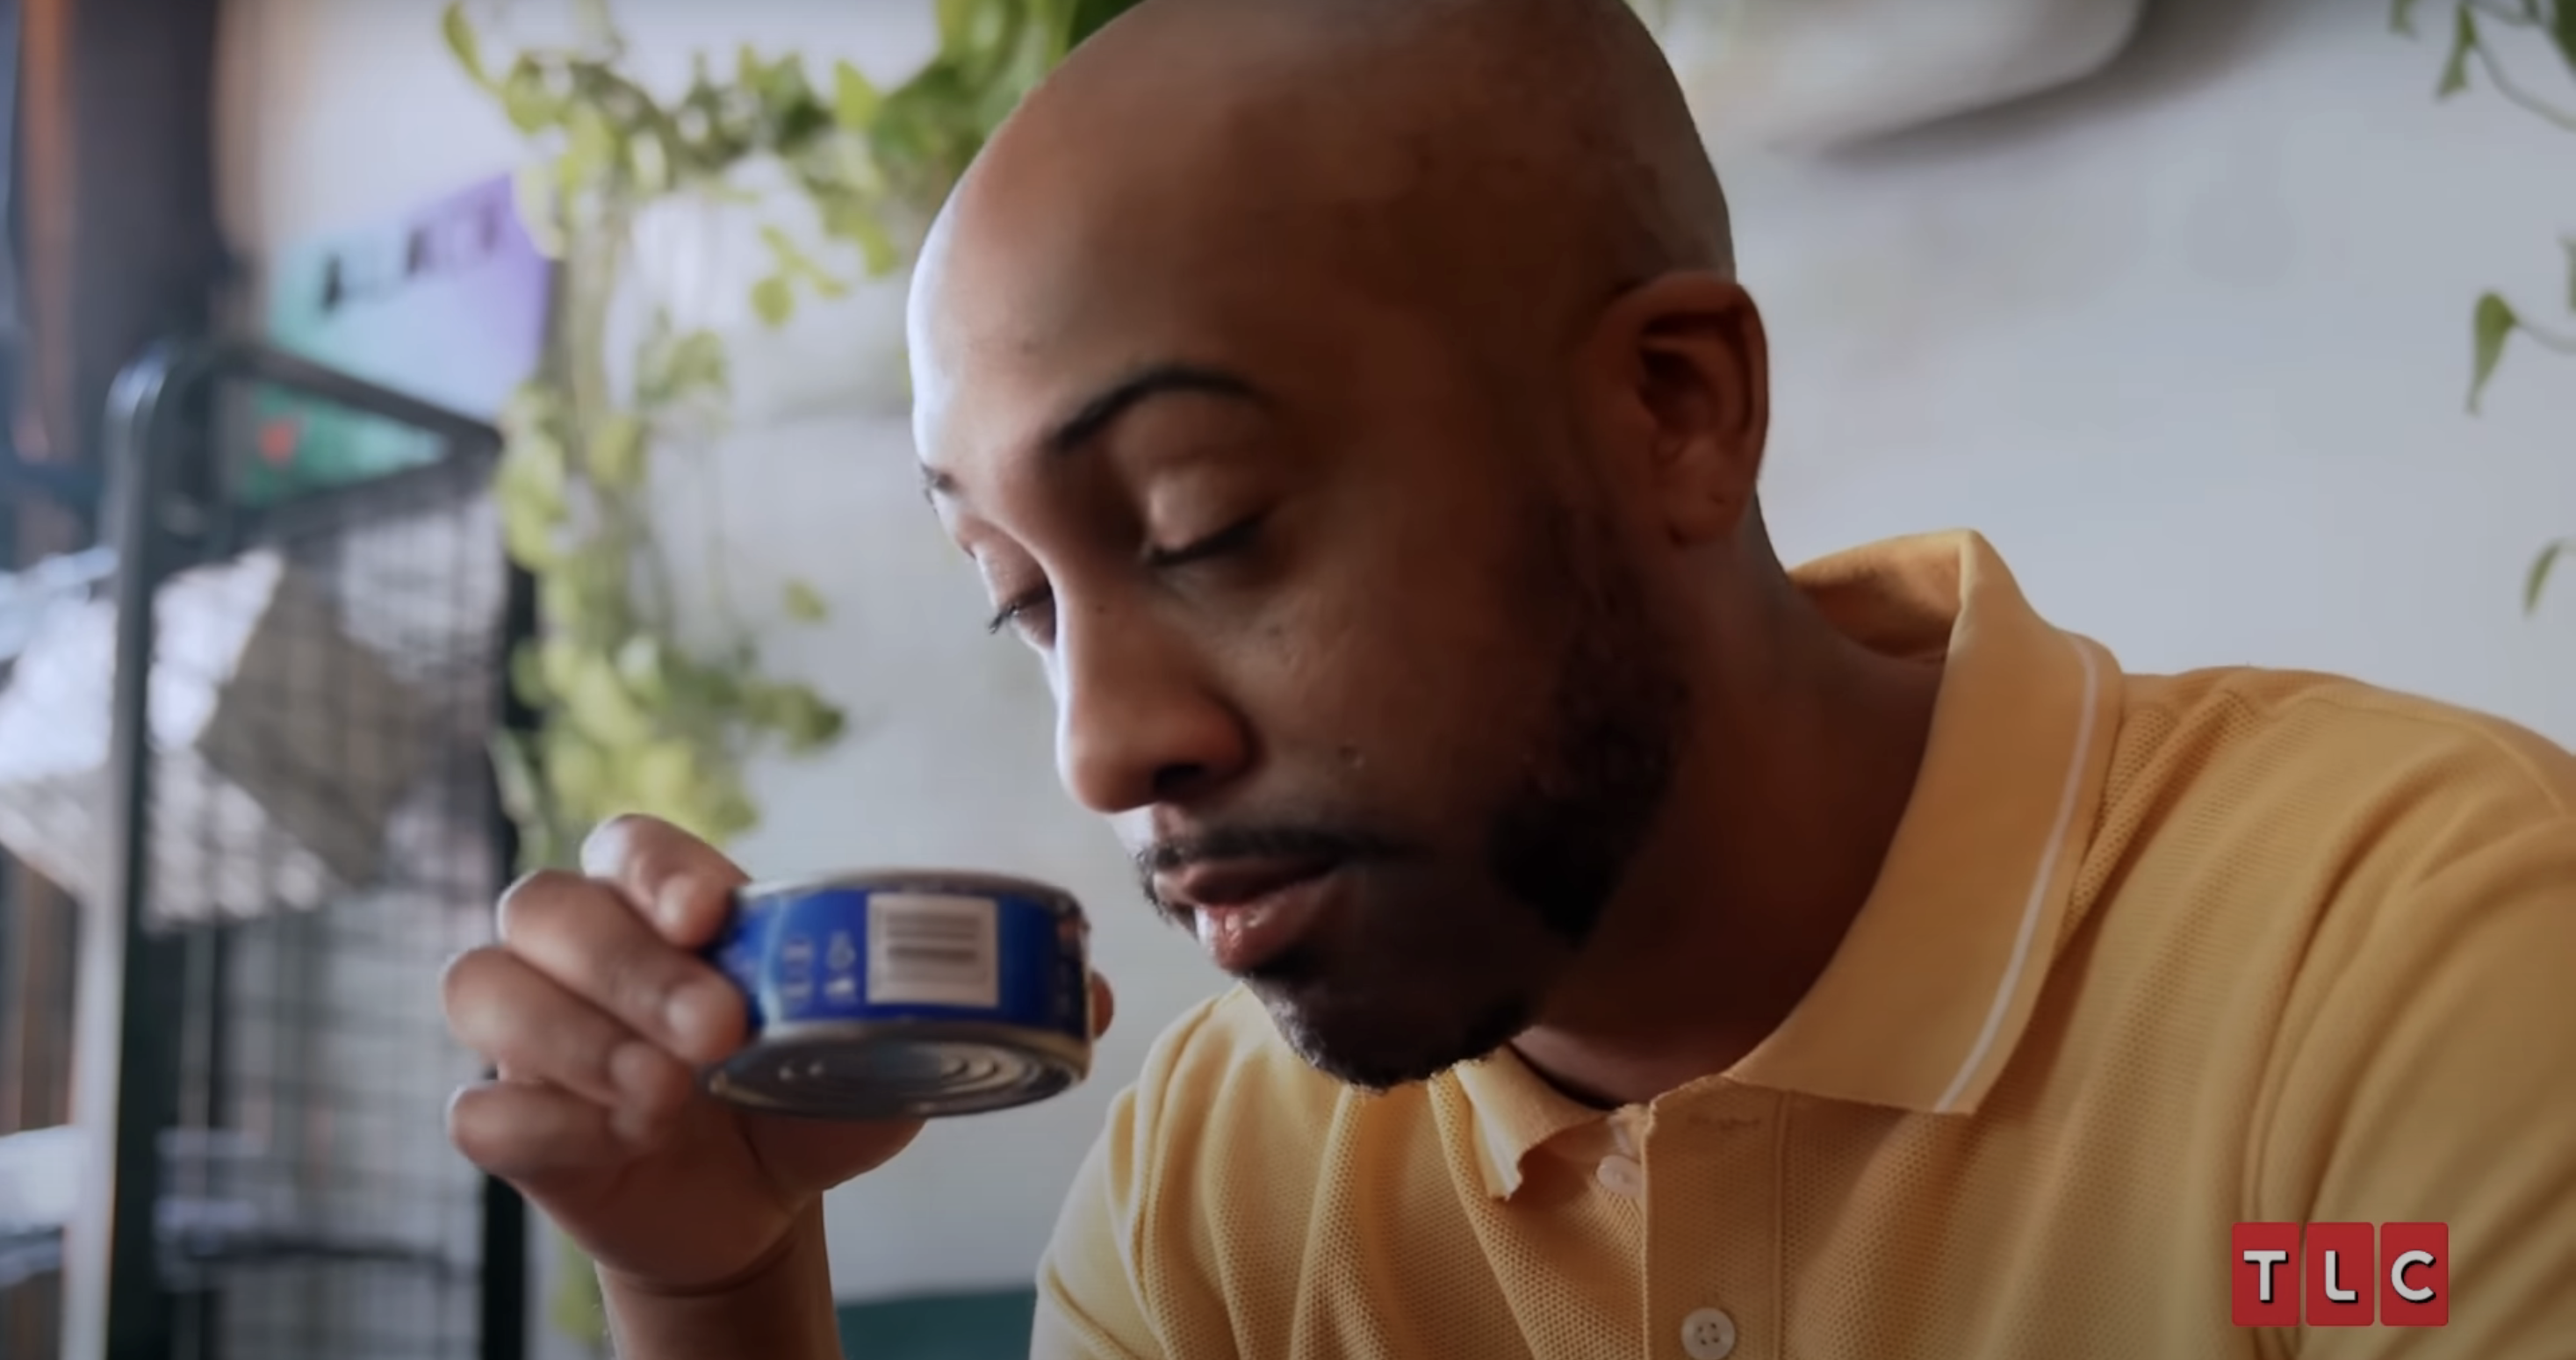 guy smelling a can of tuna